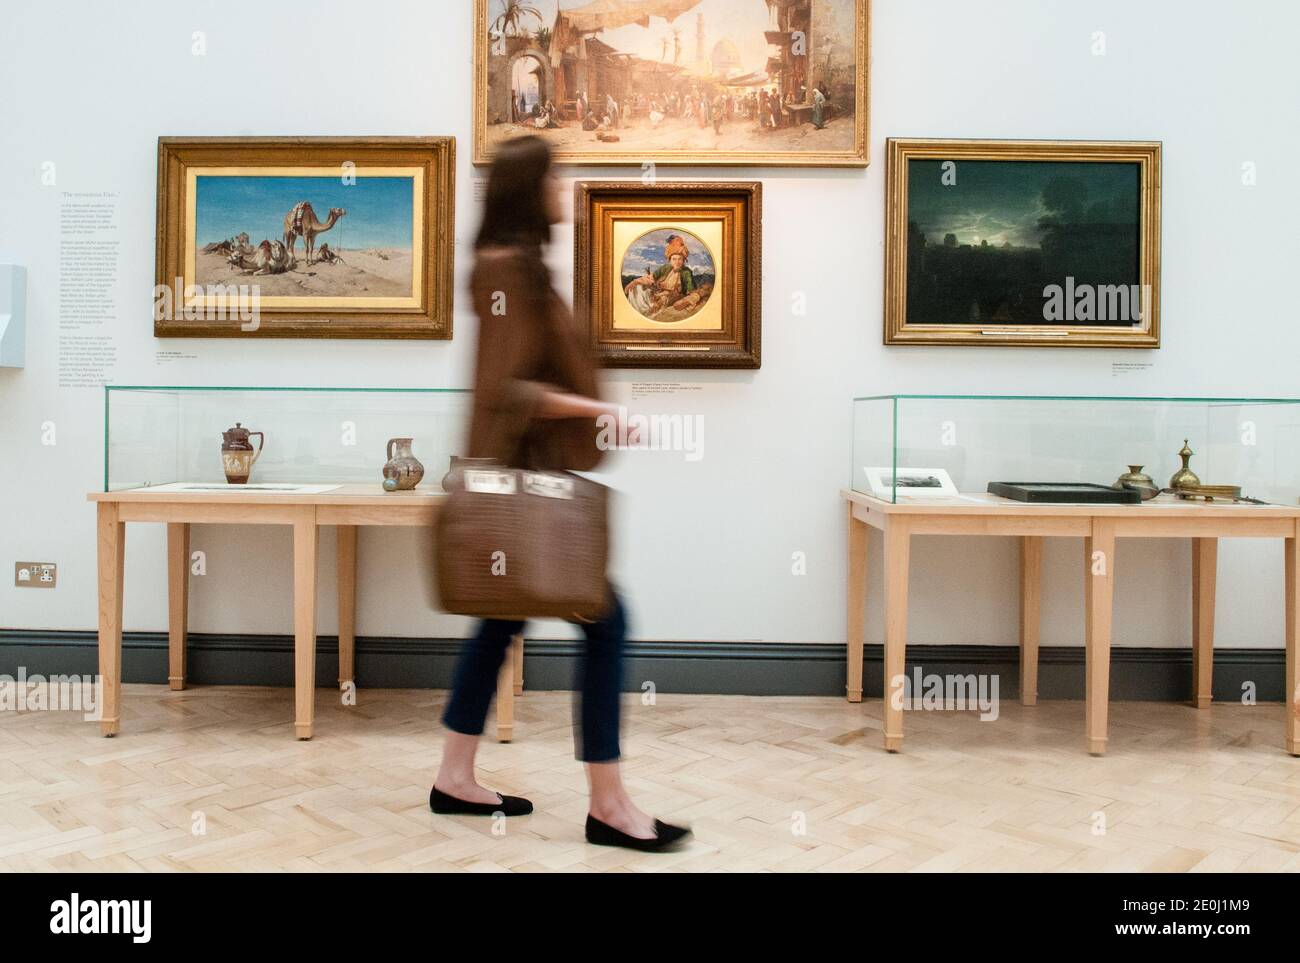 White young woman alone walking past oil paintings in an art gallery, she is blurred showing motion as she turns her head to look at the artworks Stock Photo